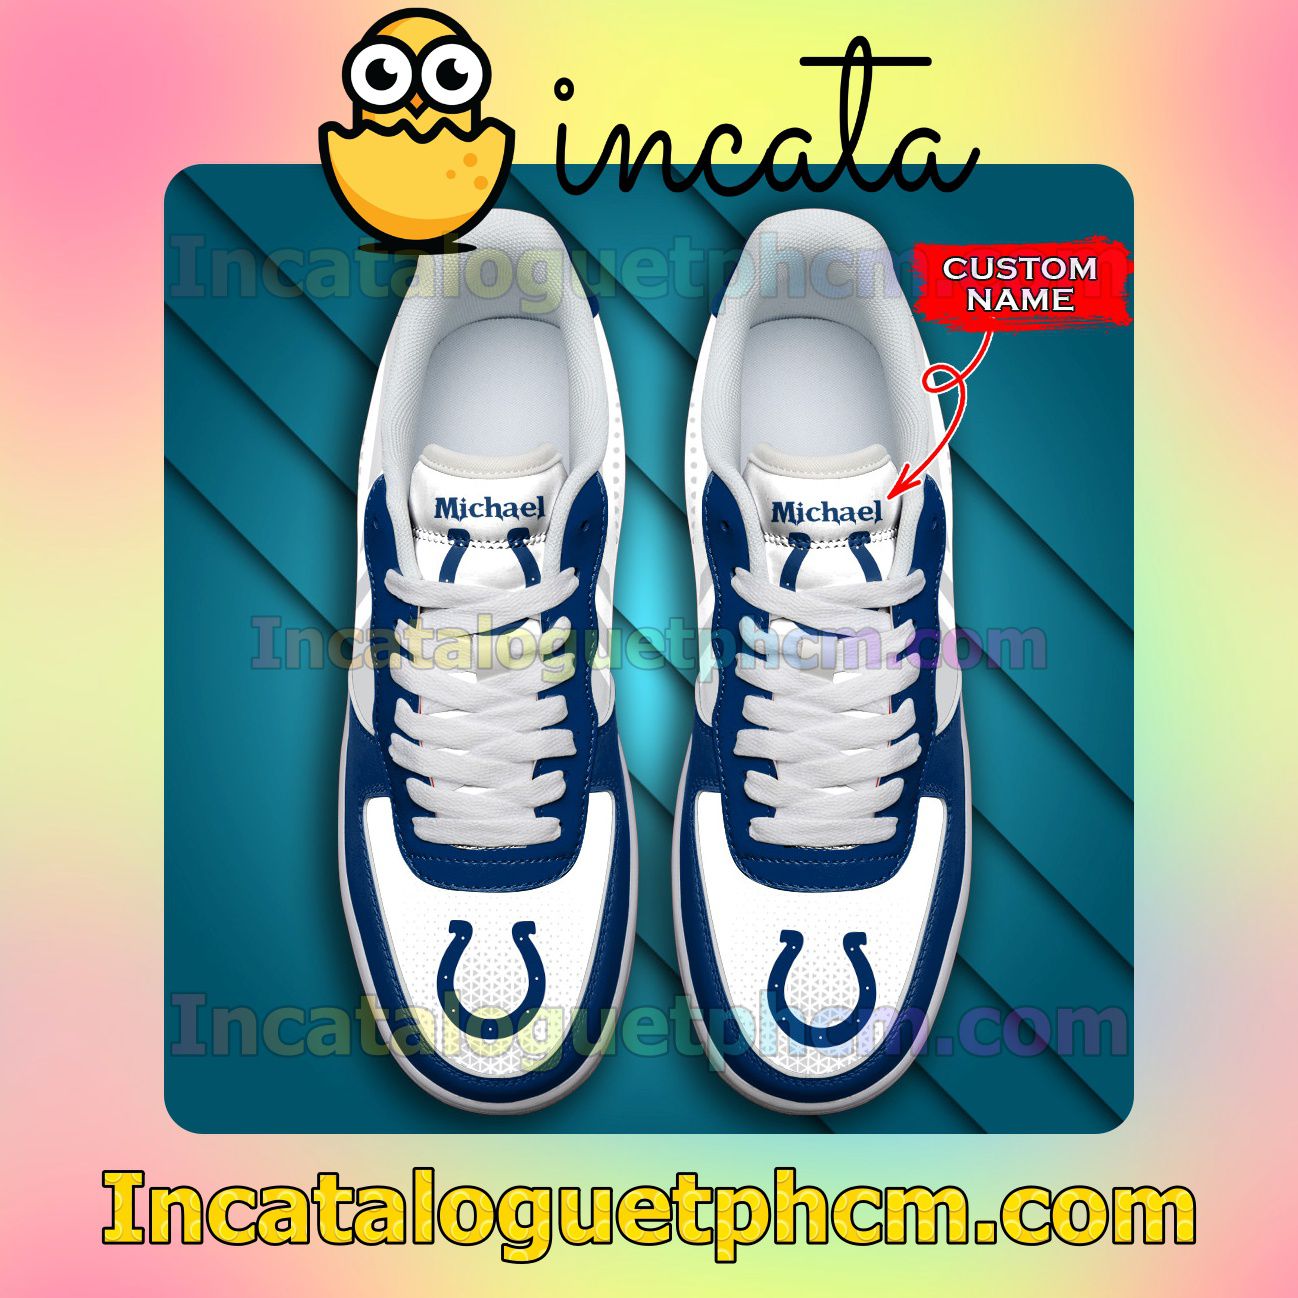 Personalized NFL Indianapolis Colts Custom Name Nike Low Shoes Sneakers